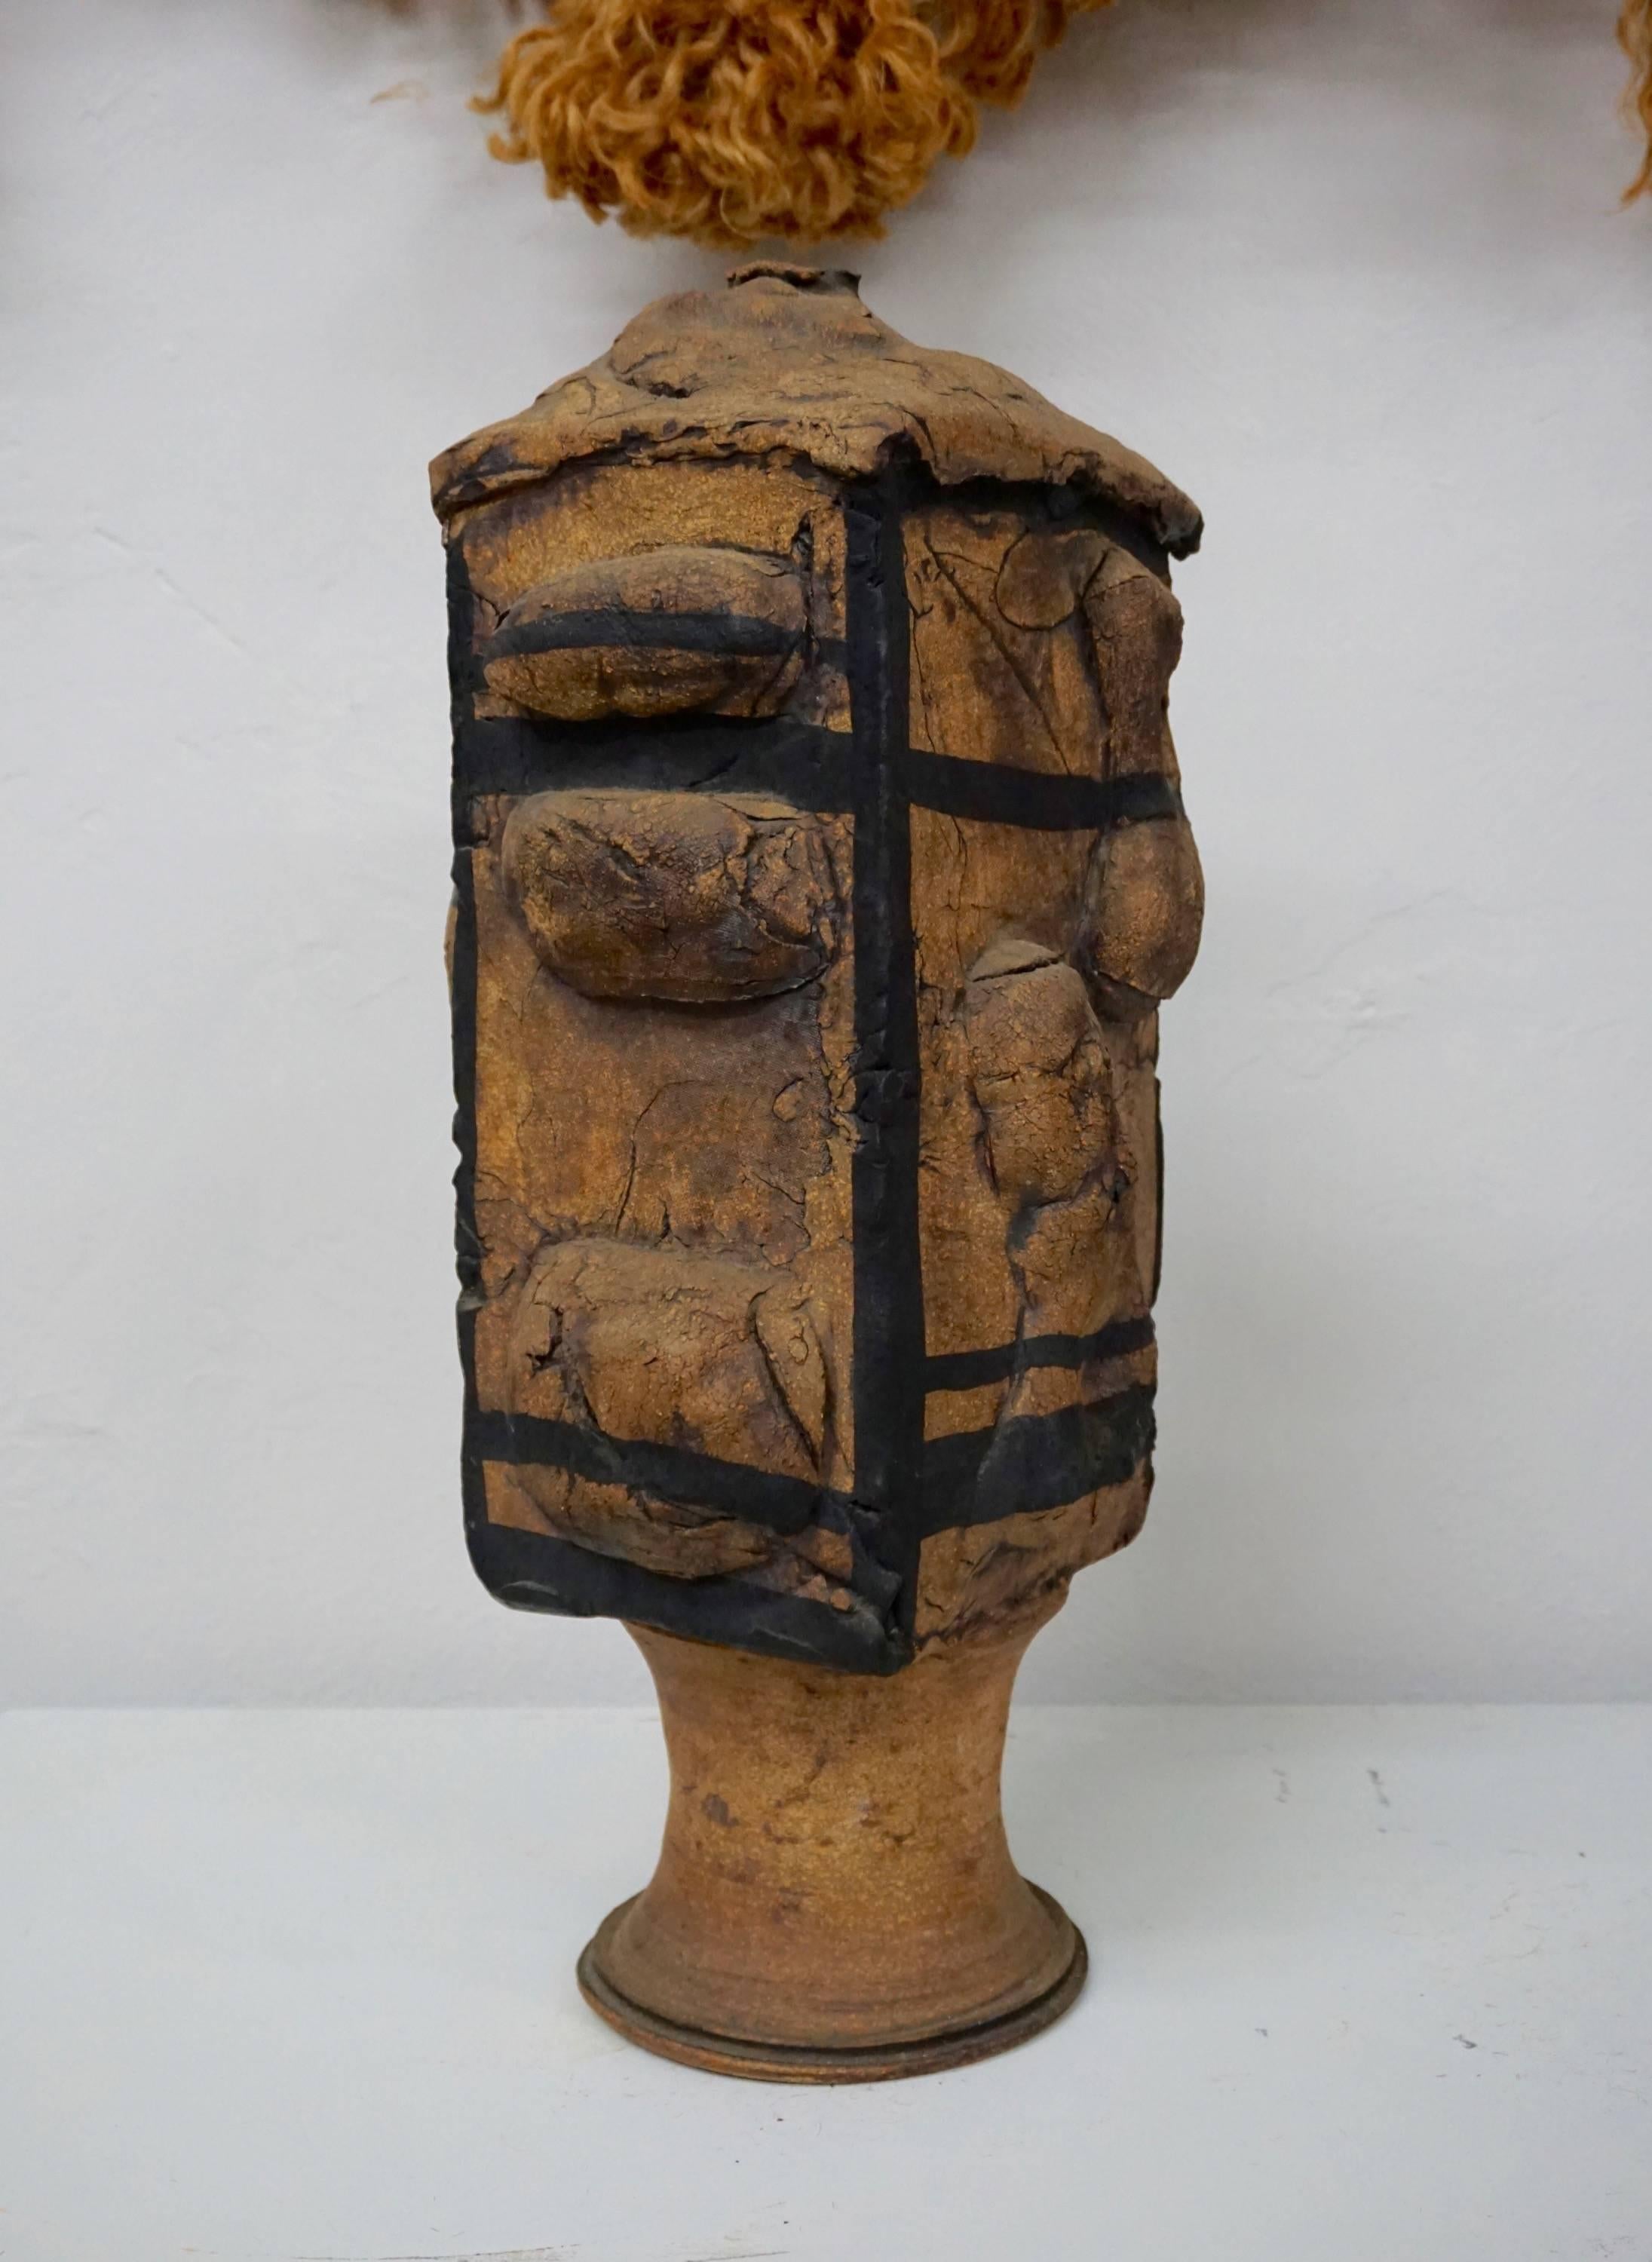 Earthenware vessel, slab construction on wheel turned base.
Matching larger vessel available.